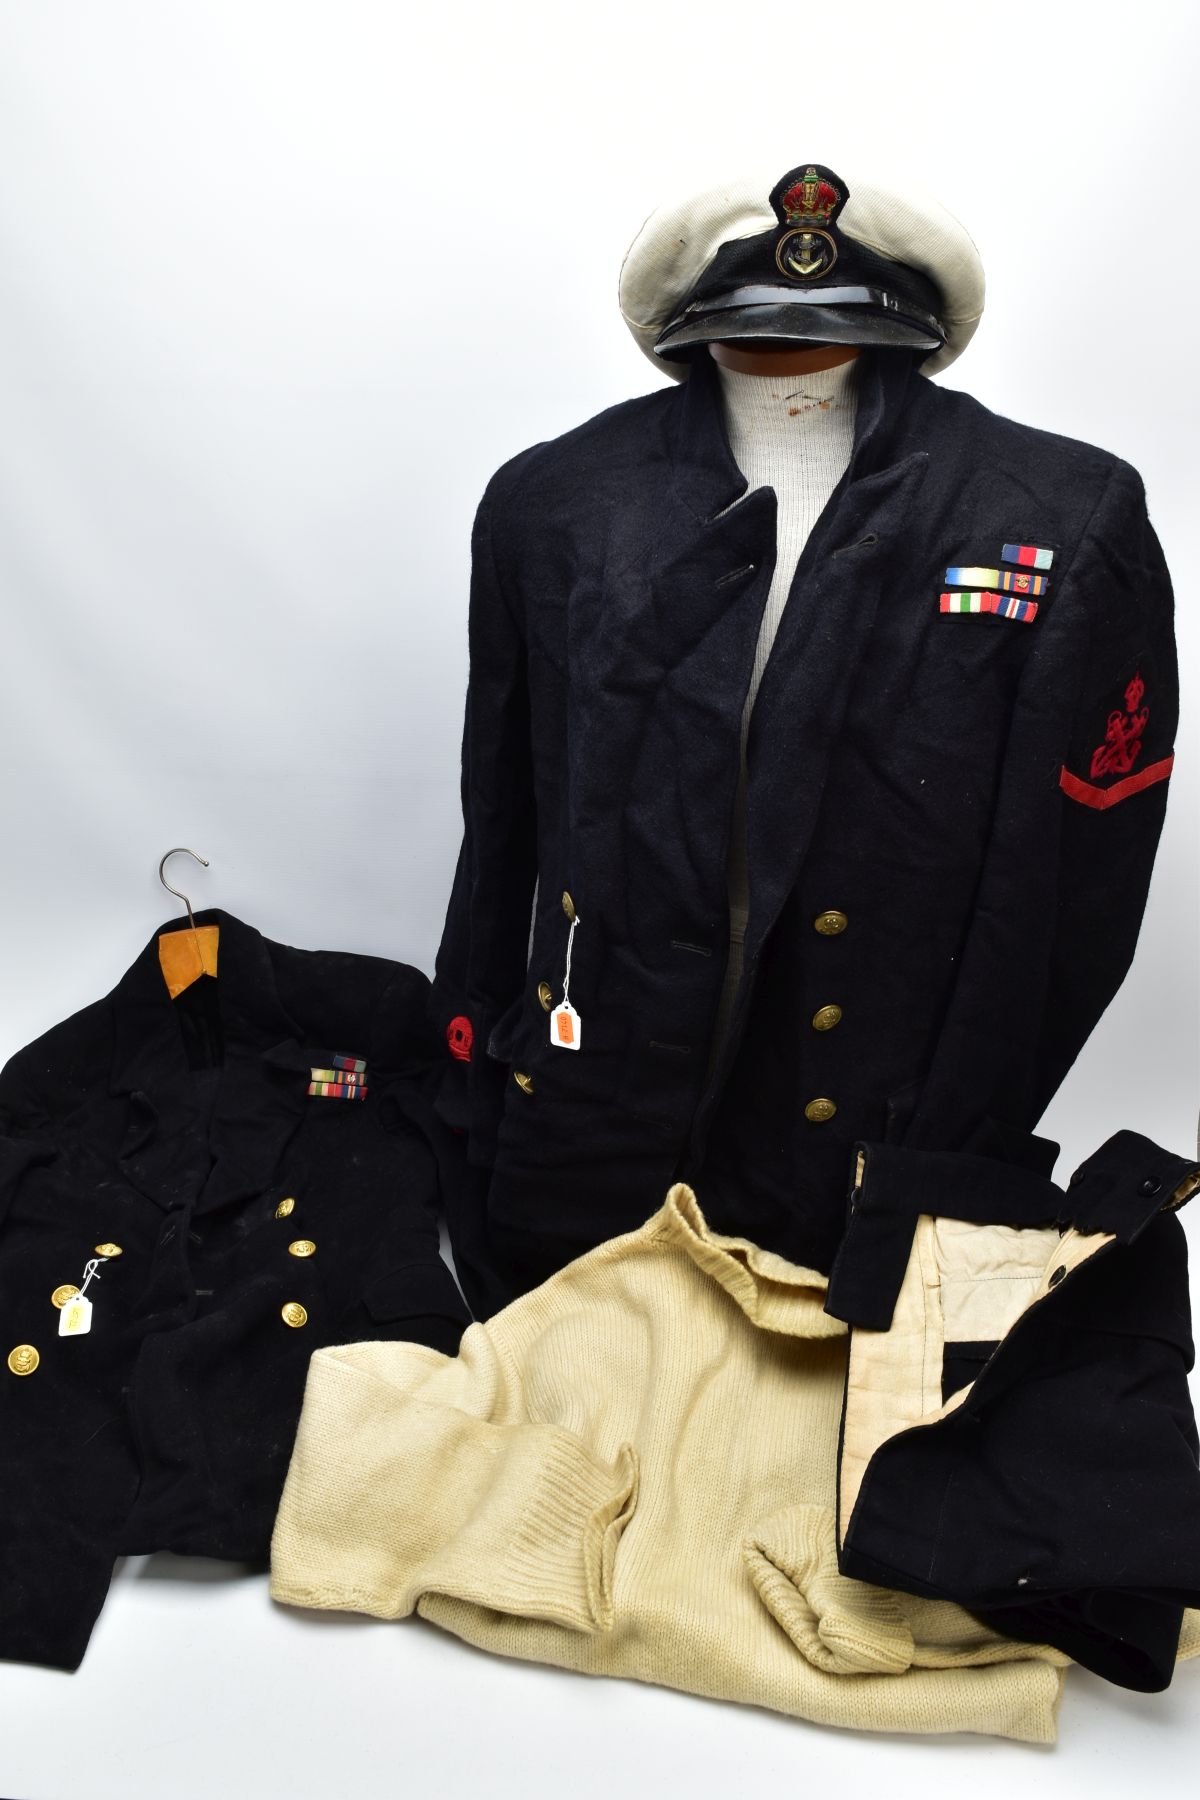 TWO x BRITISH ROYAL NAVAL UNIFORMS, jackets and trousers, one also has the traditional off white